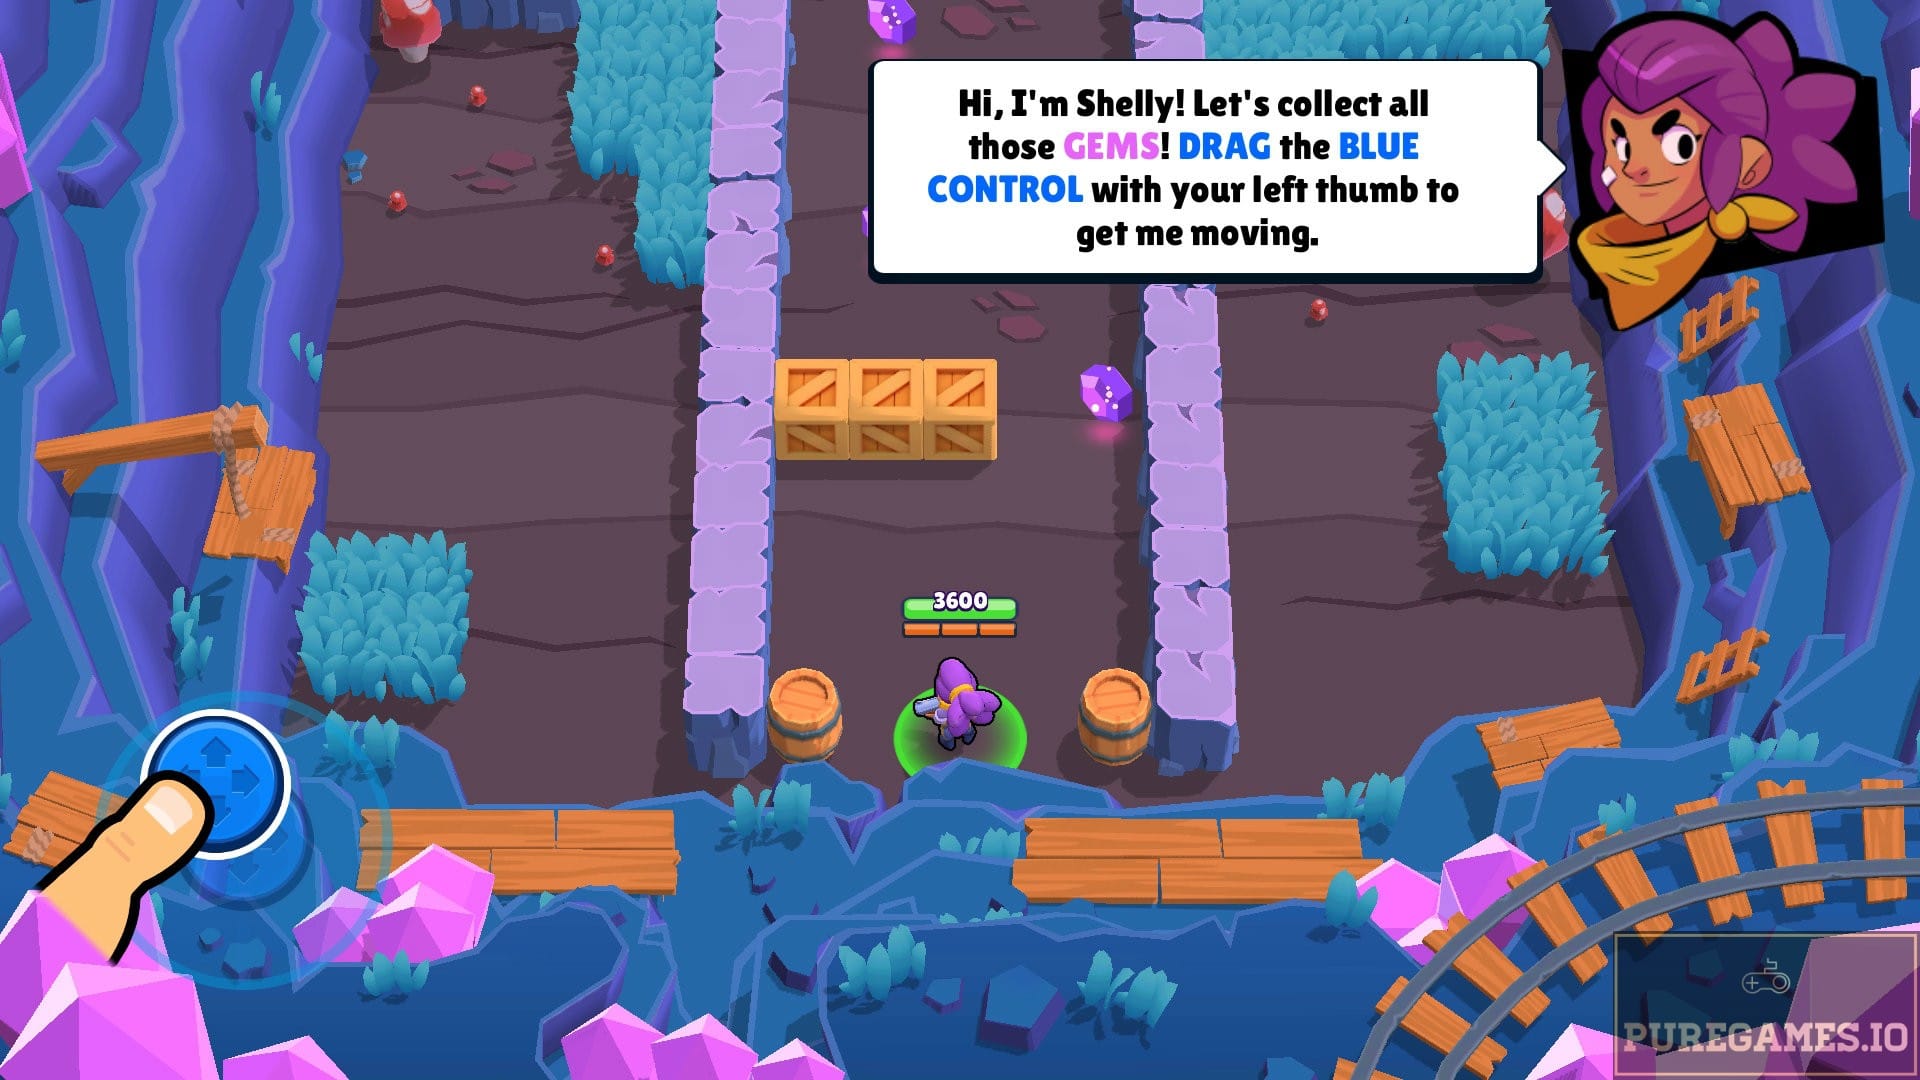 Download Brawl Stars APK For Android/iOS PureGames